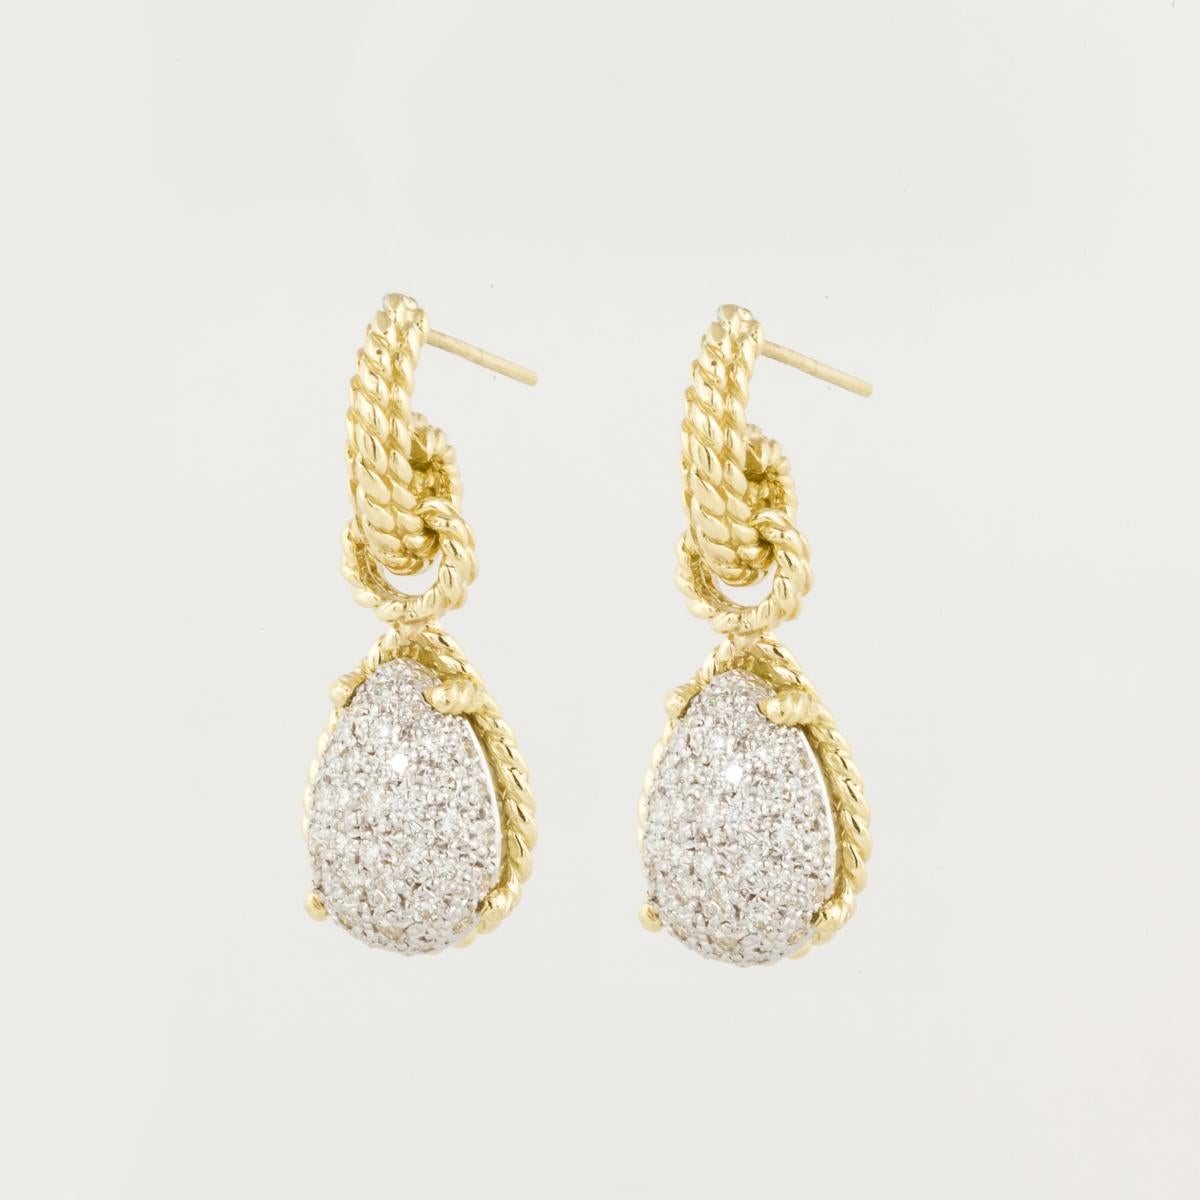 18K yellow gold earrings by Cassis.  The bottom dangle is a pear shape with pave diamonds.  There are eighty-two round diamonds that total 1.25 carats, G-H color and VS clarity.  They measure 1 1/4 inches long and 1/2 inch wide.  The earrings have